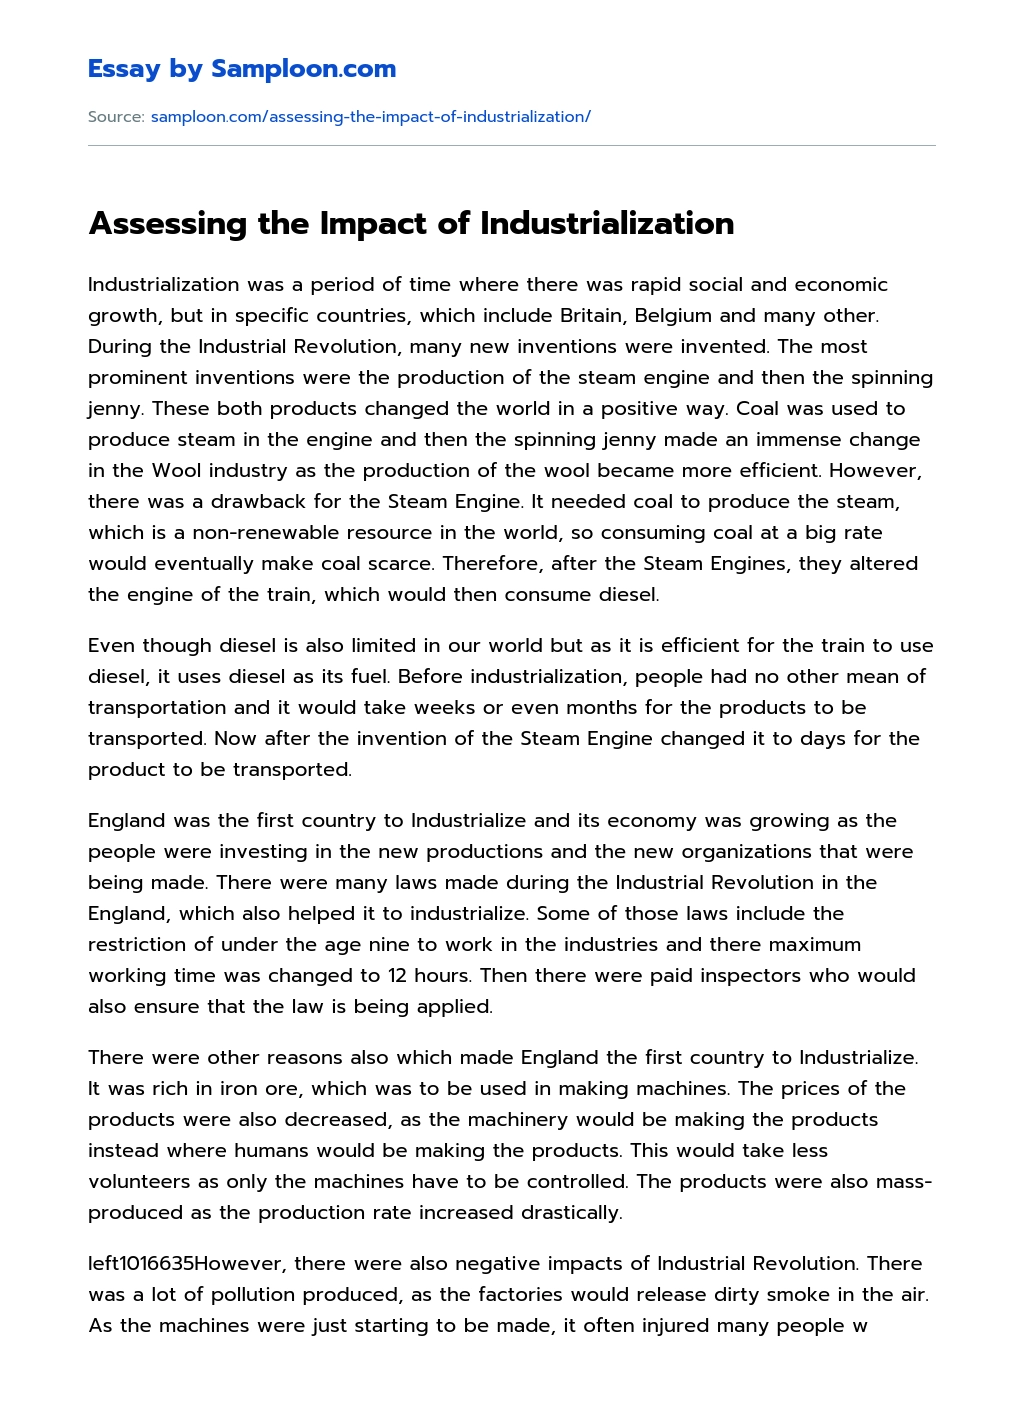 Assessing the Impact of Industrialization essay